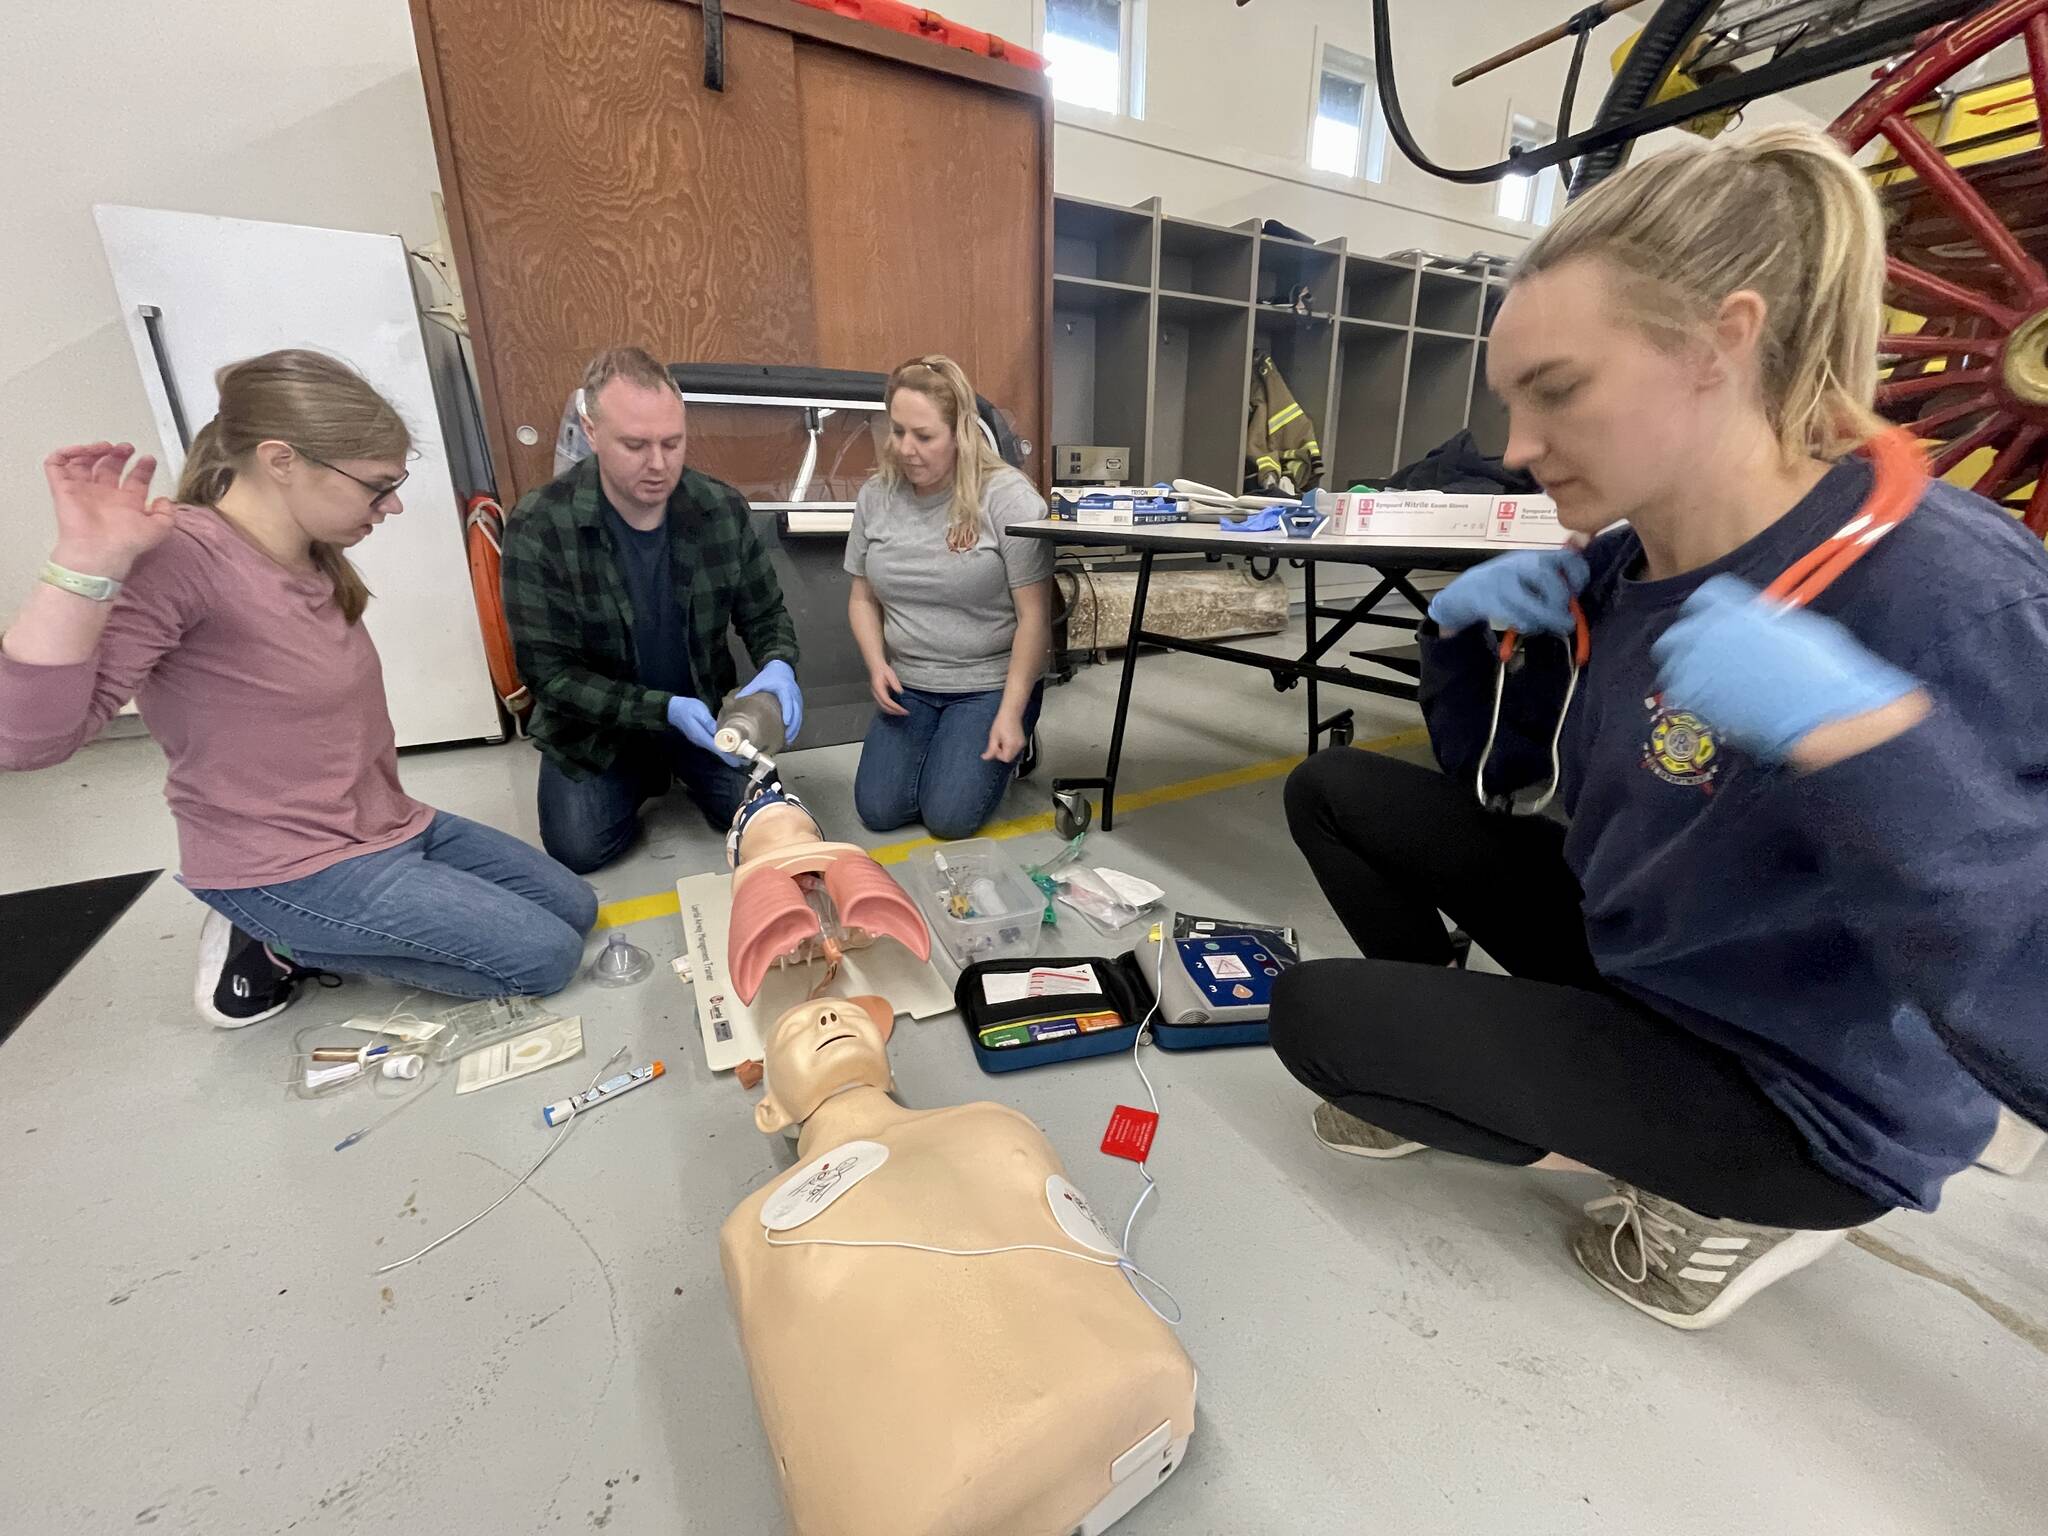 Volunteers work to provide lifesaving care during the EMT academy at the Cosmopolis Fire Department on April 22. Photo: Michael S. Lockett